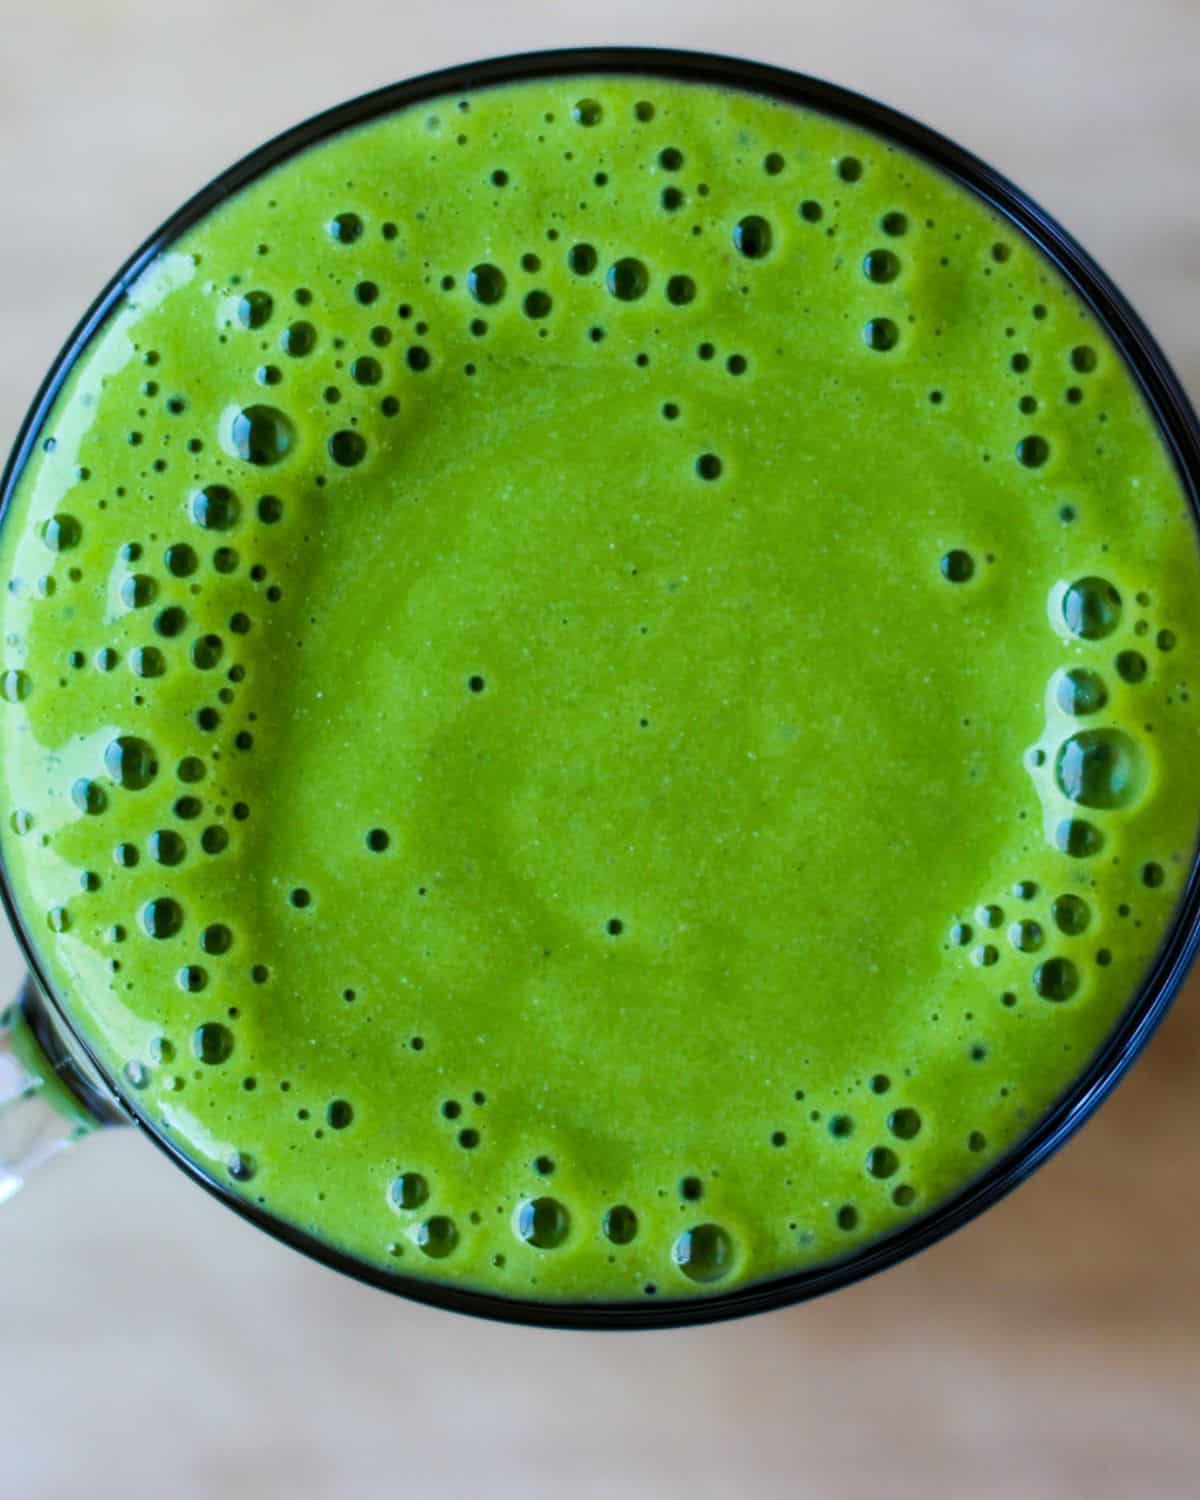 Bright green spinach pineapple smoothie in a glass cup. Overhead view.